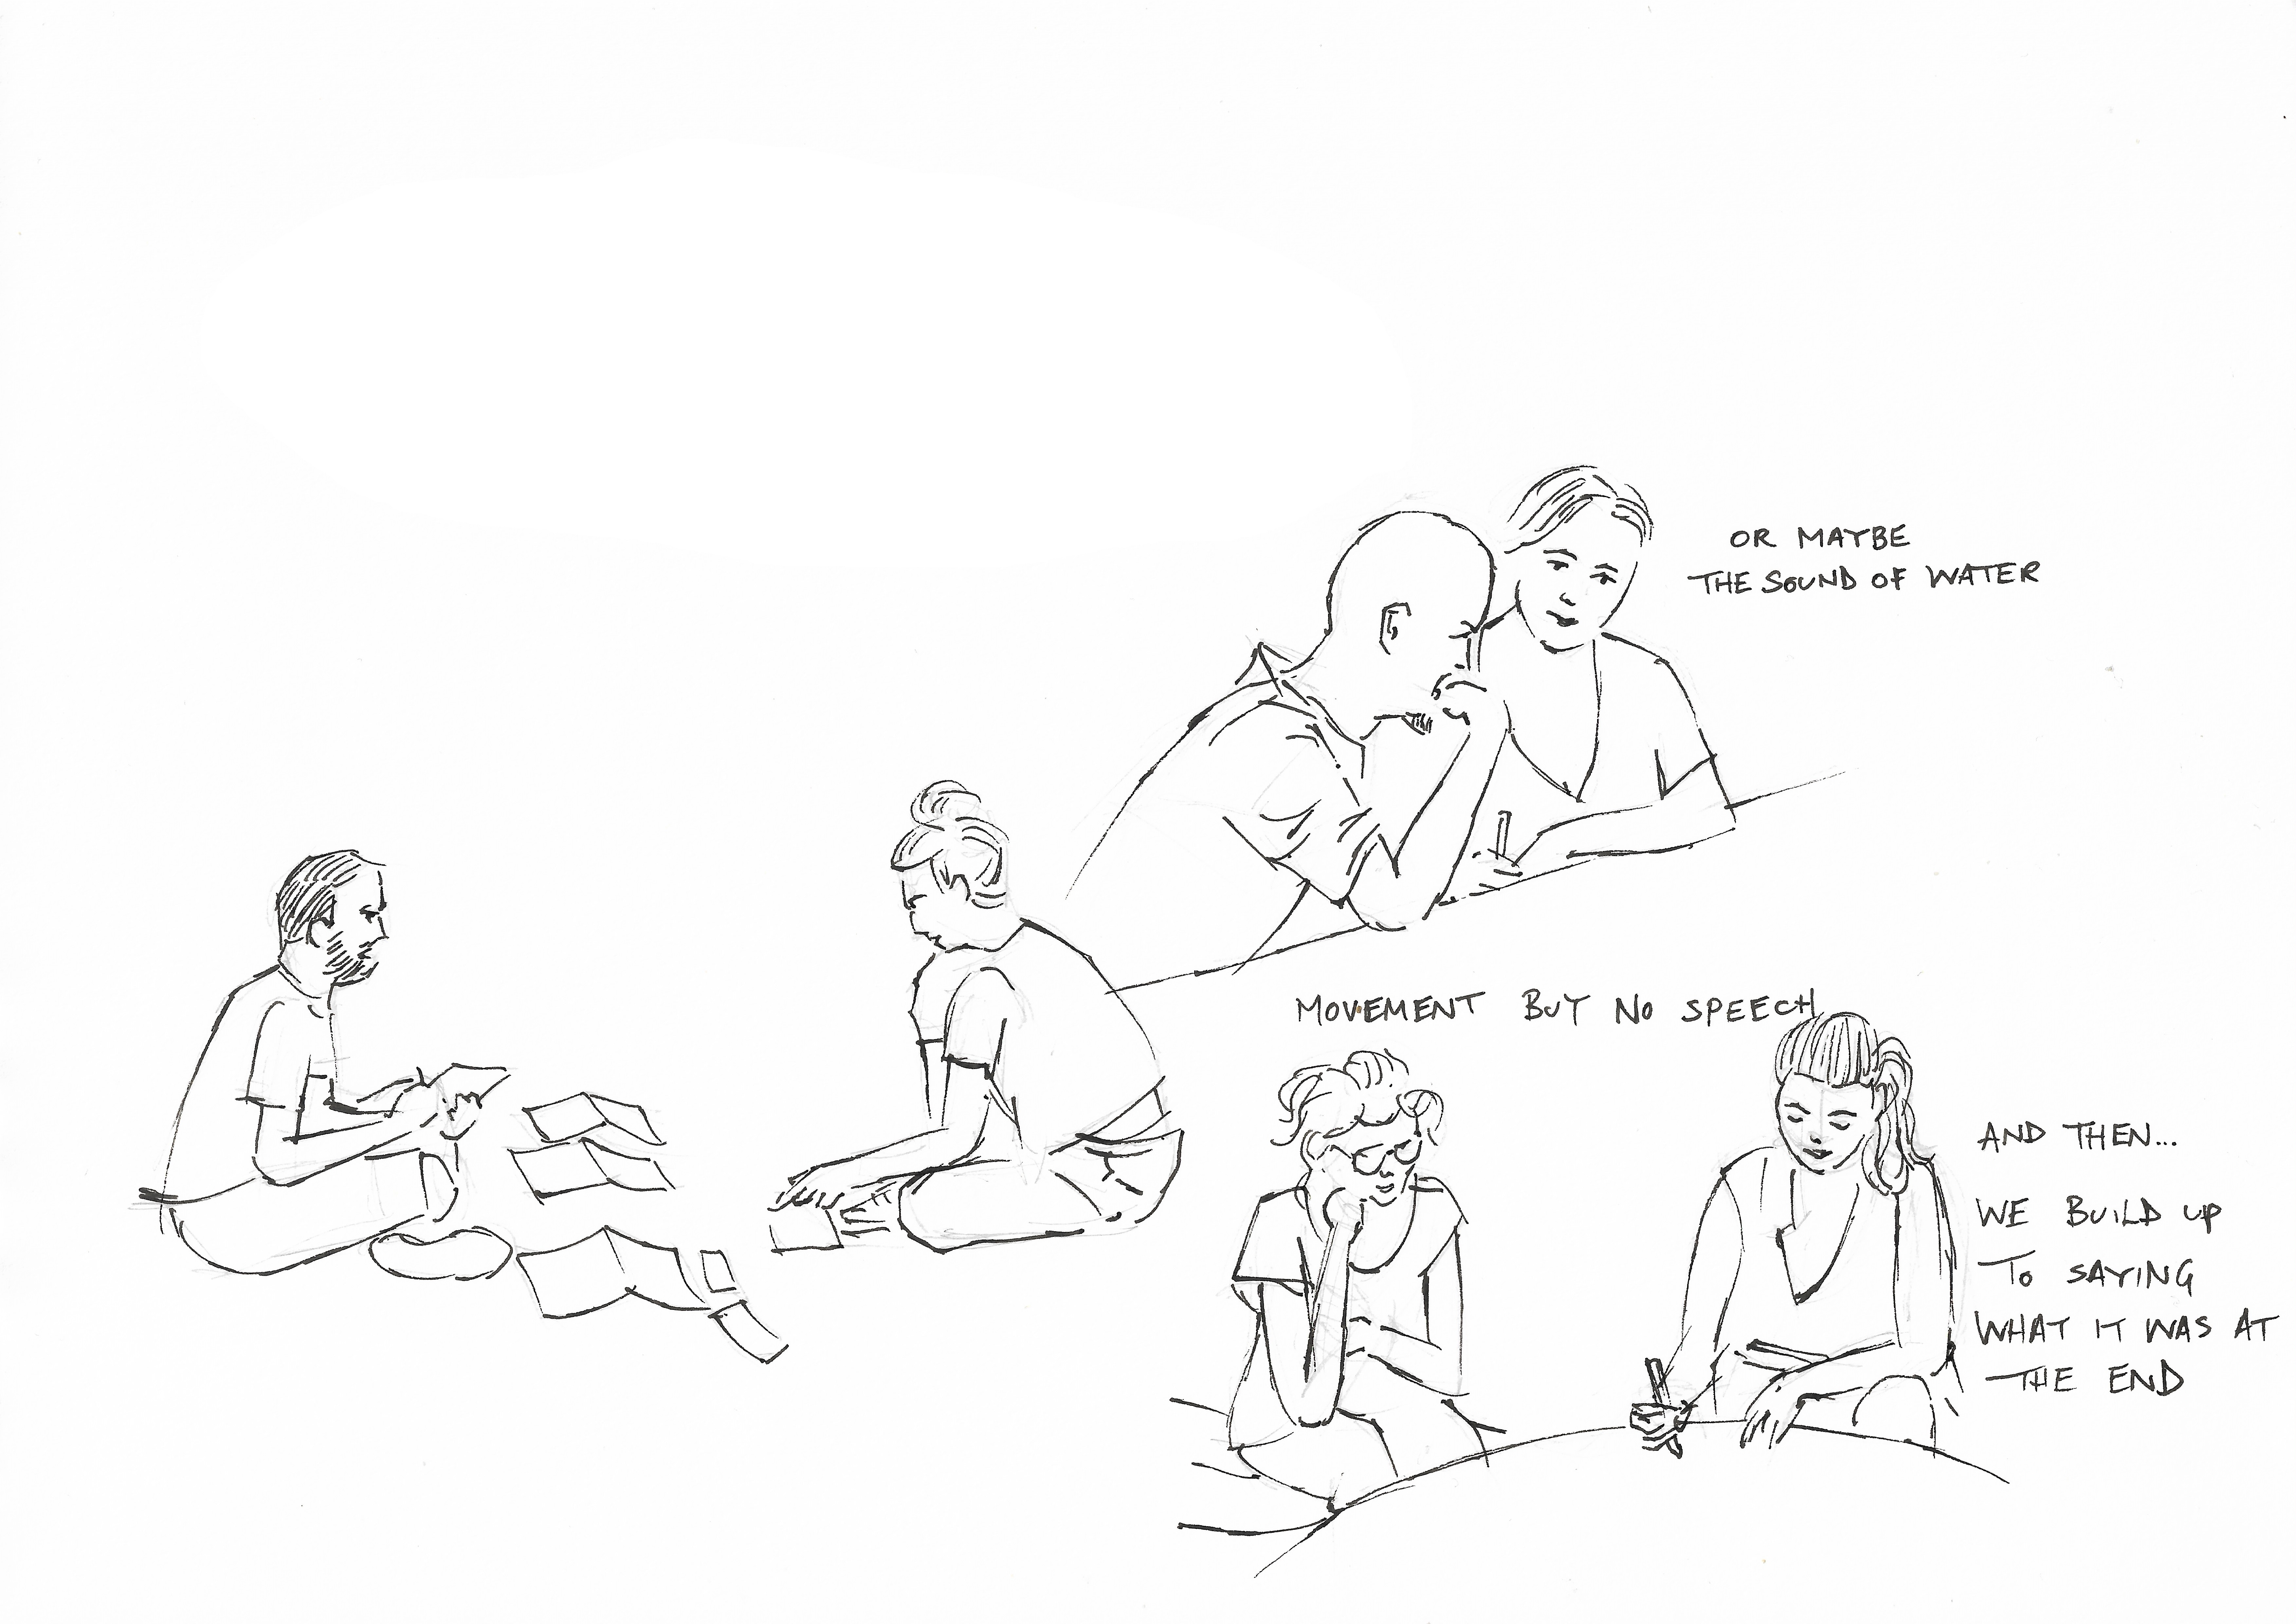 Drawing of people discussing and writing